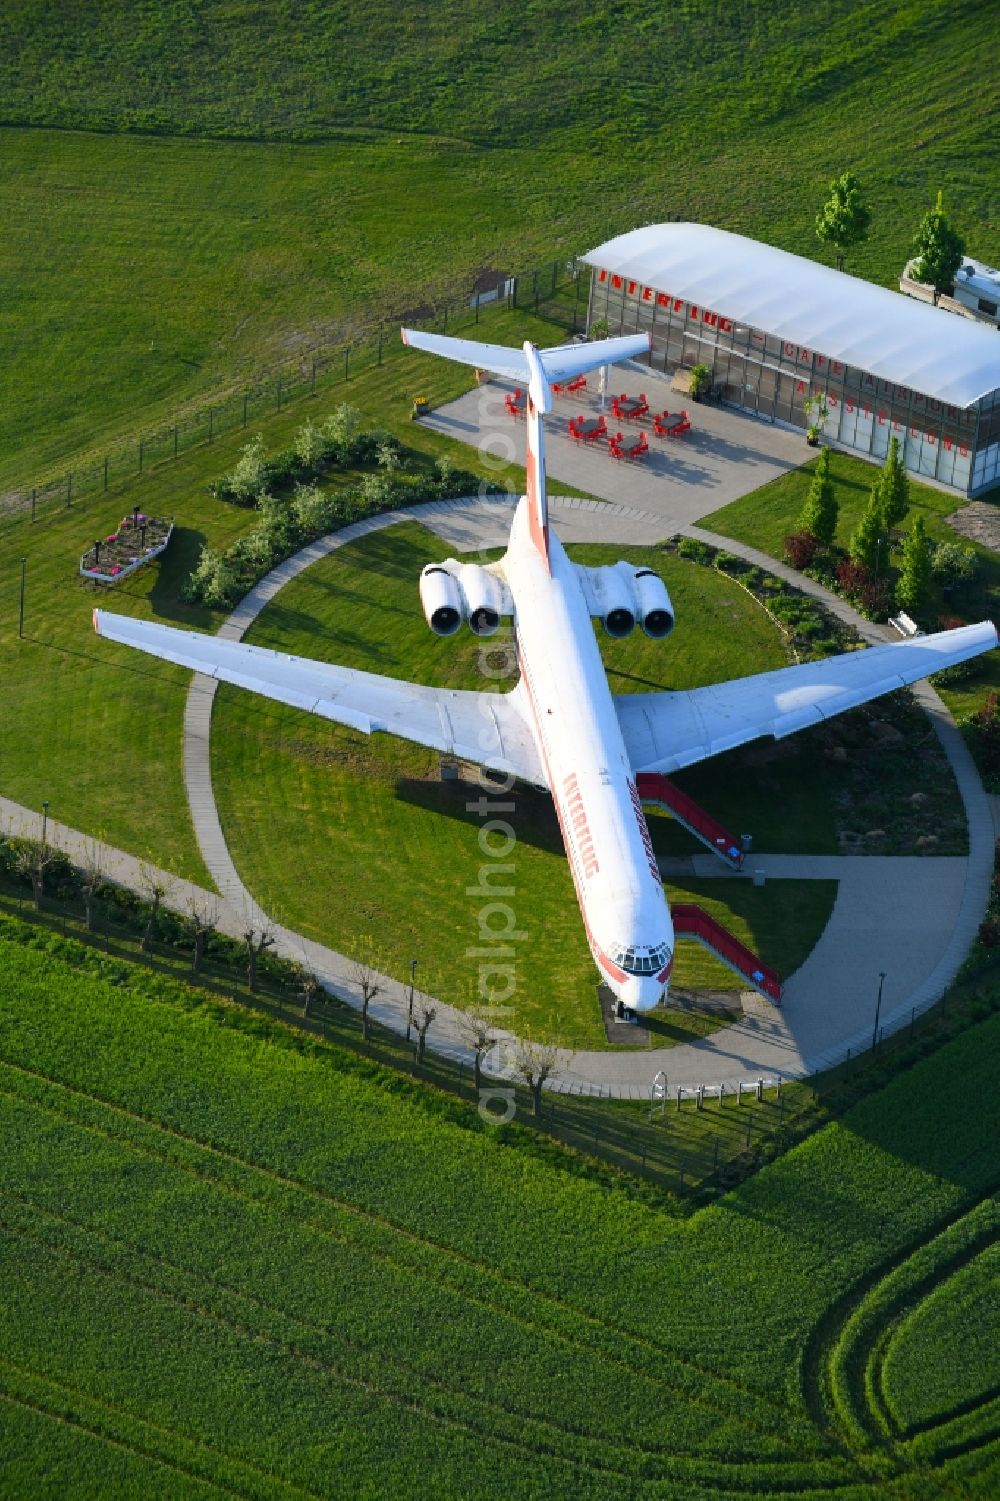 Stölln from above - Discharged passenger aircraft IL-62 of the GDR - airline INTERFLUG Lady Agnes on a parking area in Stoelln in the federal state Brandenburg, Germany